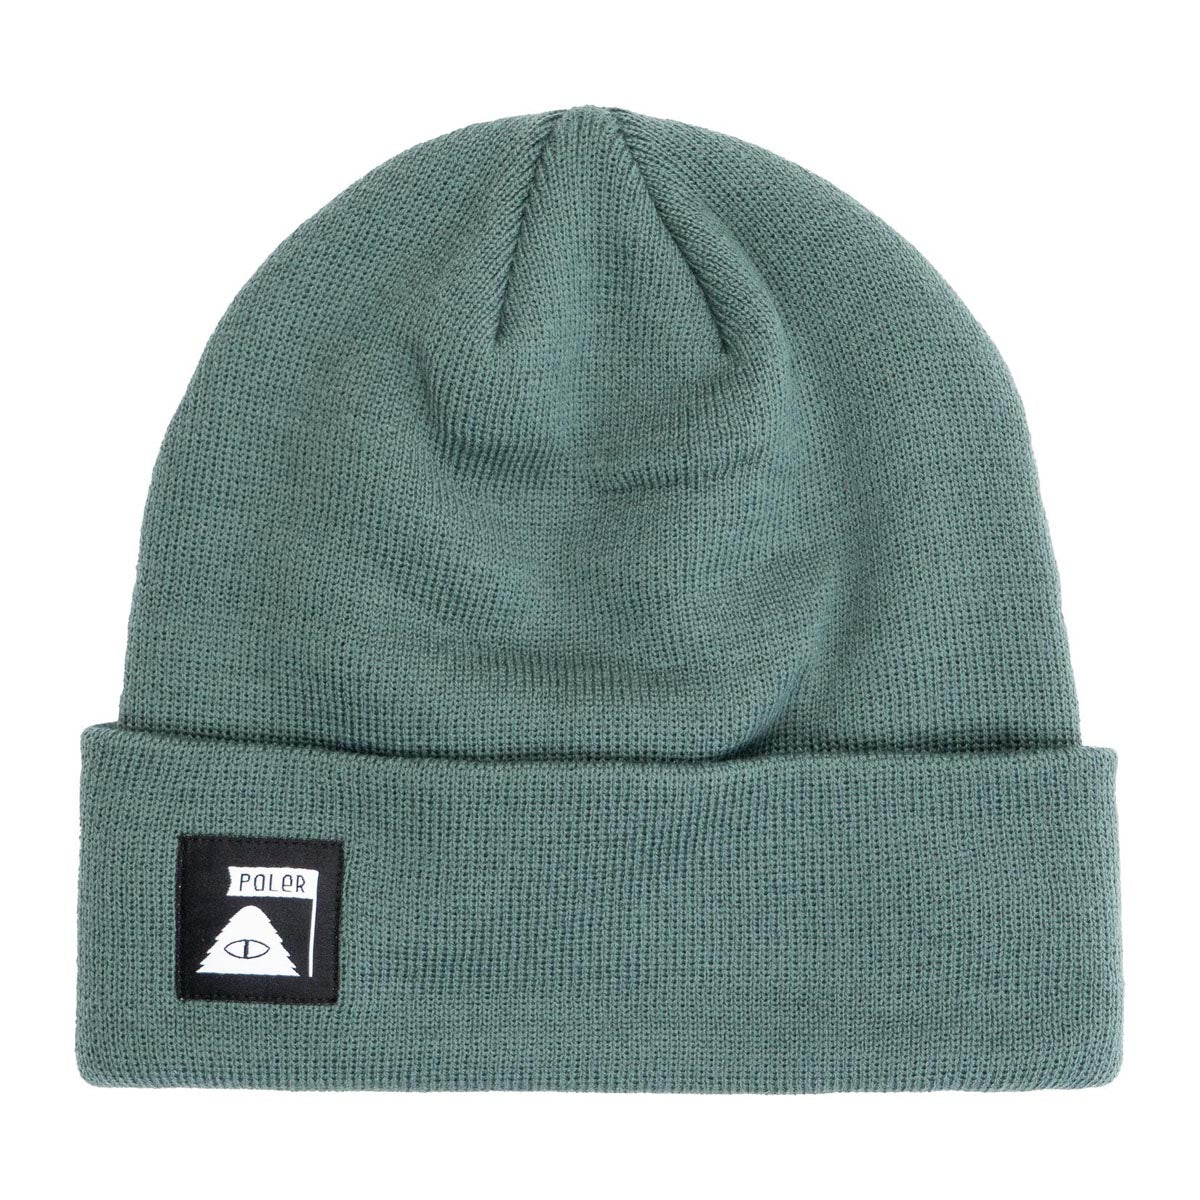 Poler Daily Driver Beanie - Stone image 1